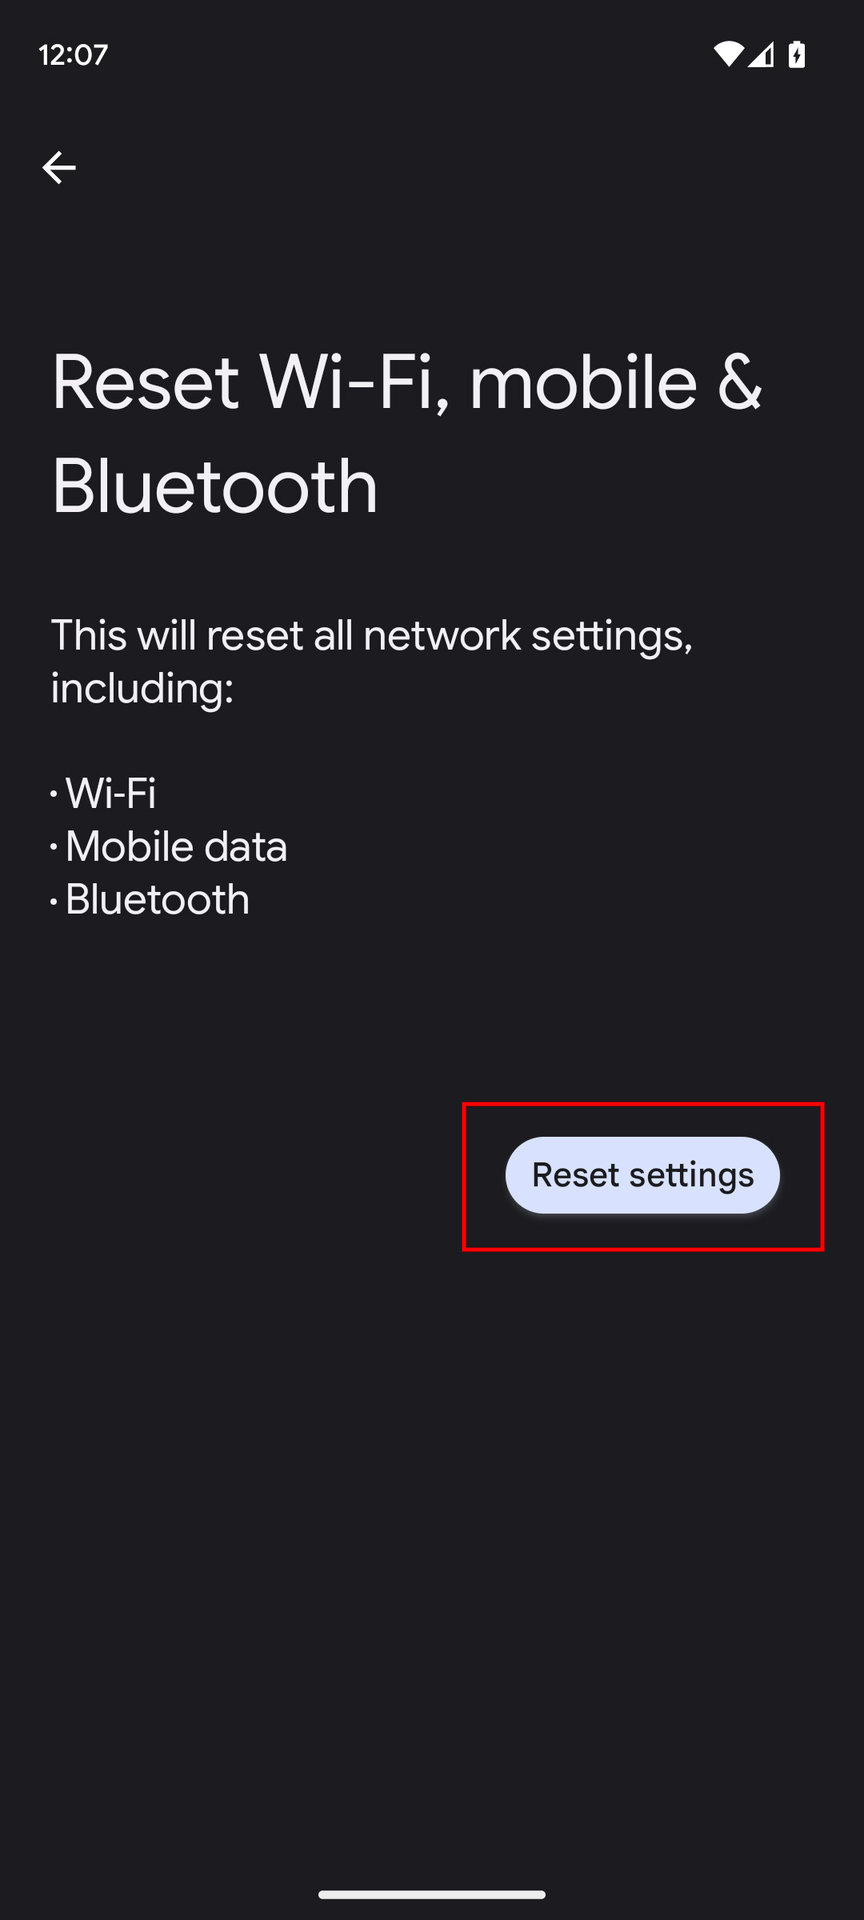 How to reset network settings on Android 4 - Fixing mobile data issues